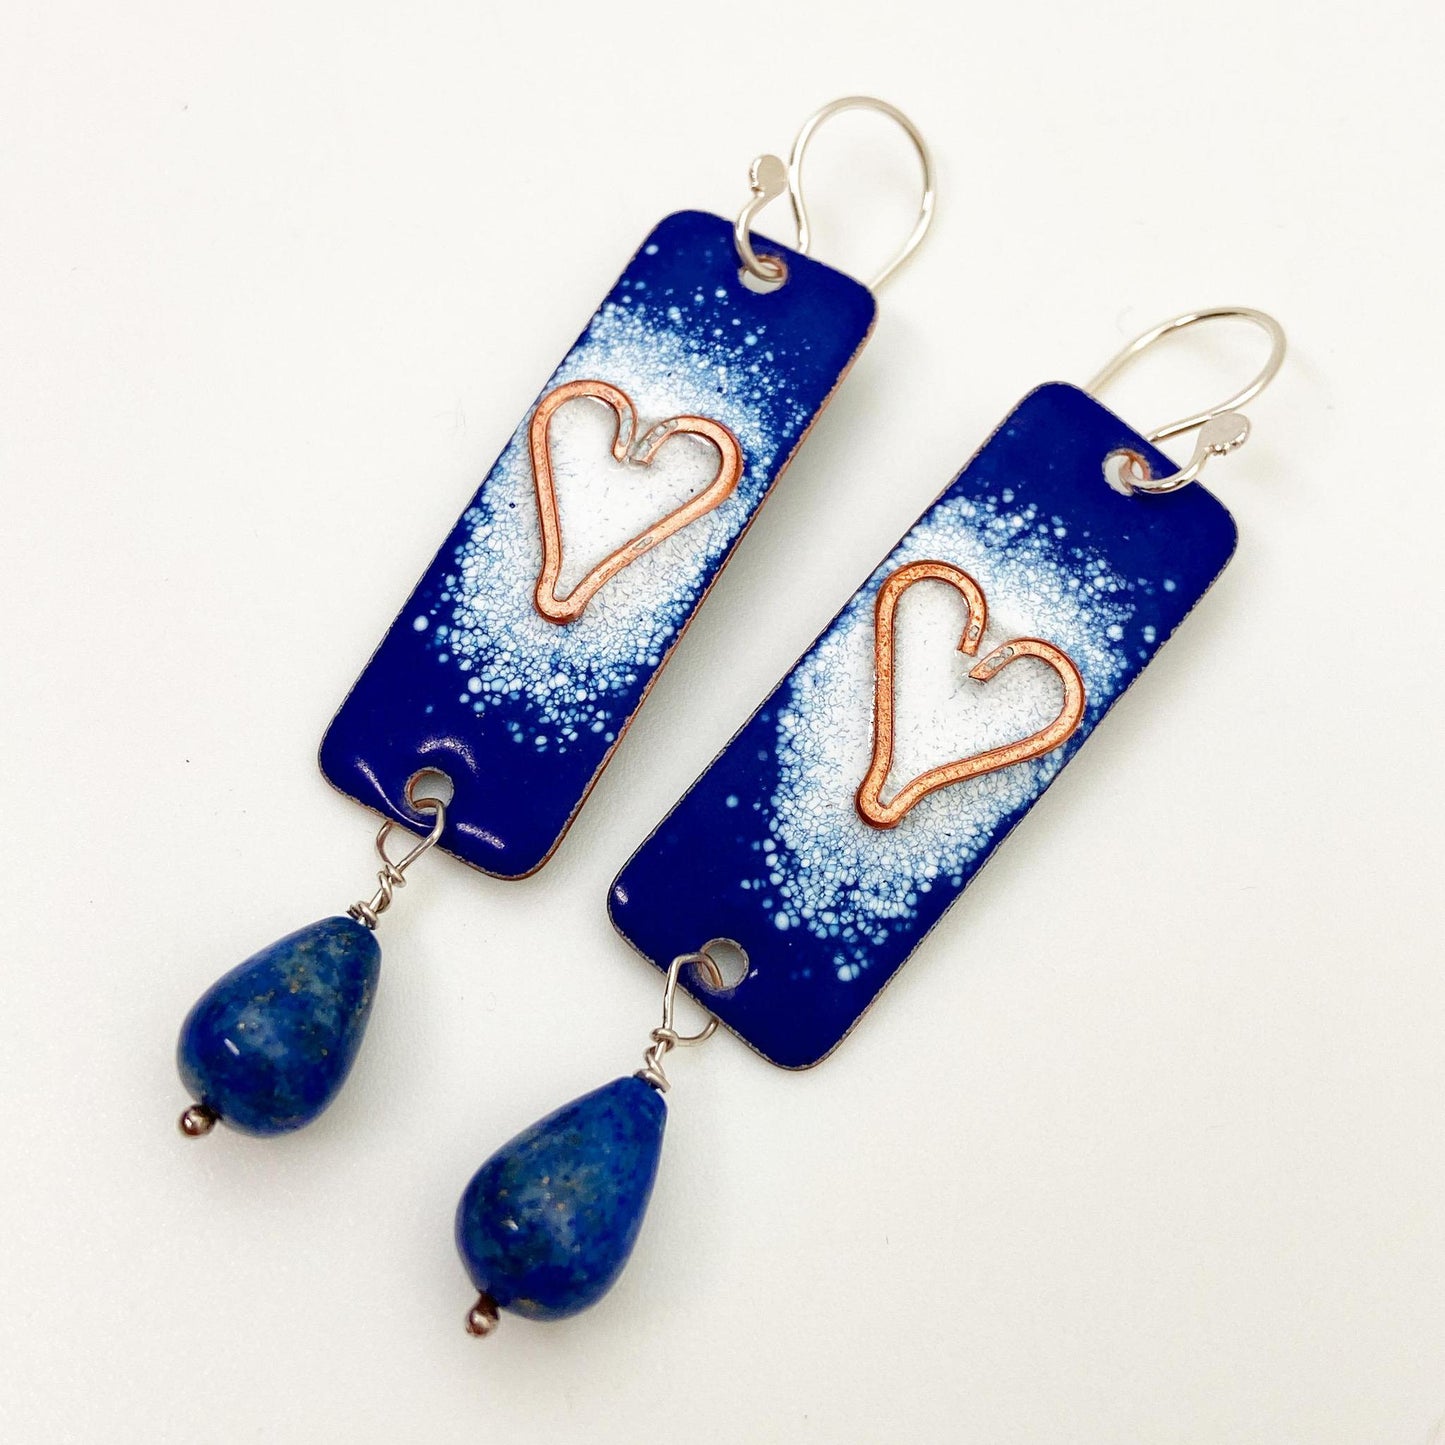 Earrings - White Hearts with Lapis Lazuli Crystals - Copper and Enamel on Copper